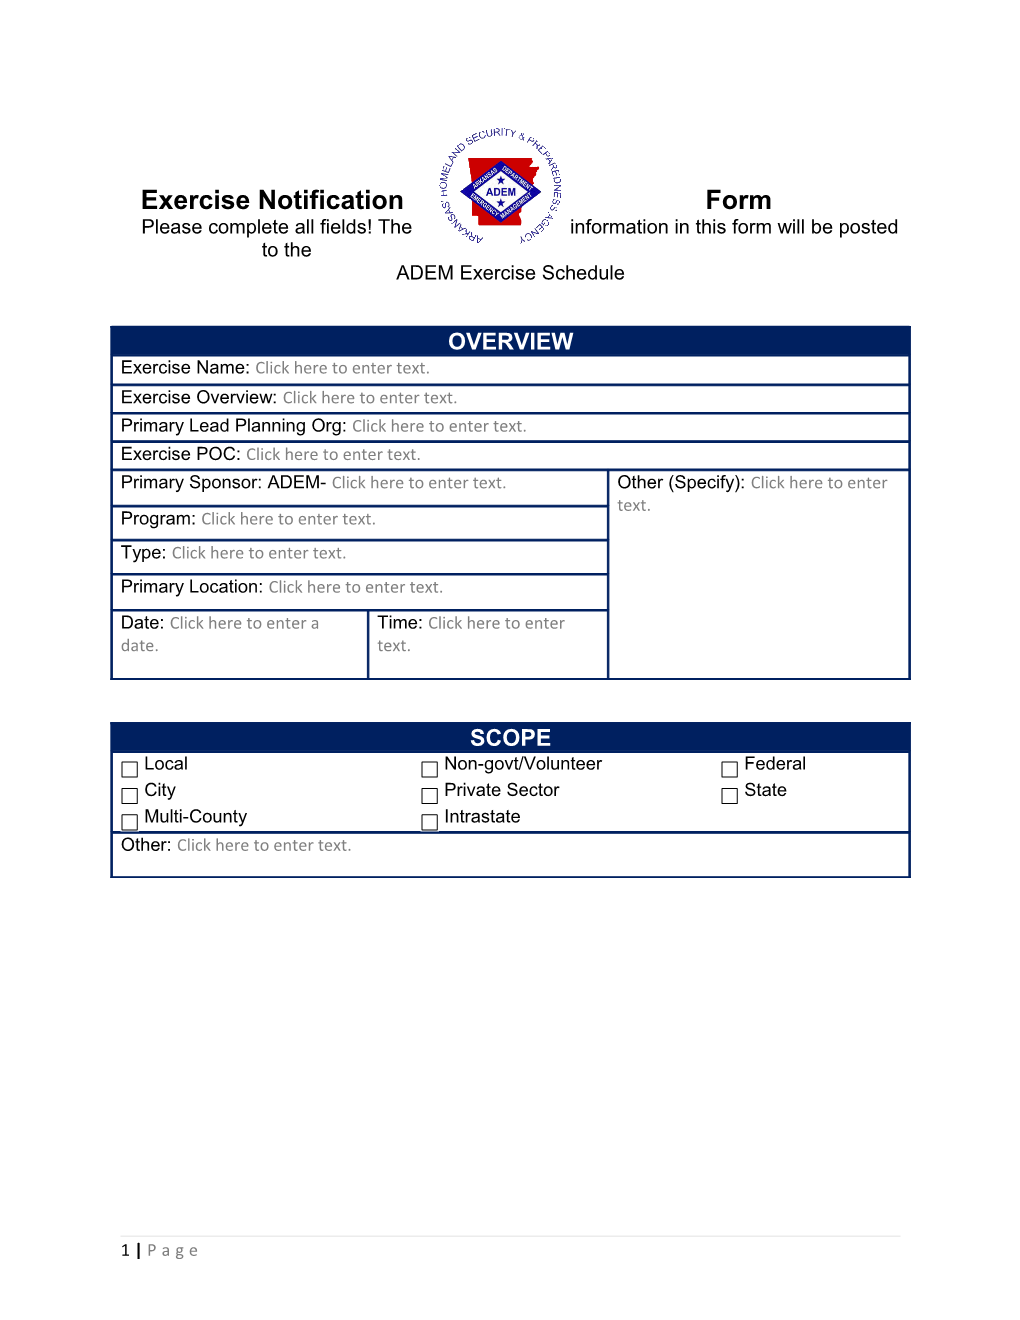 Exercise Notification Form